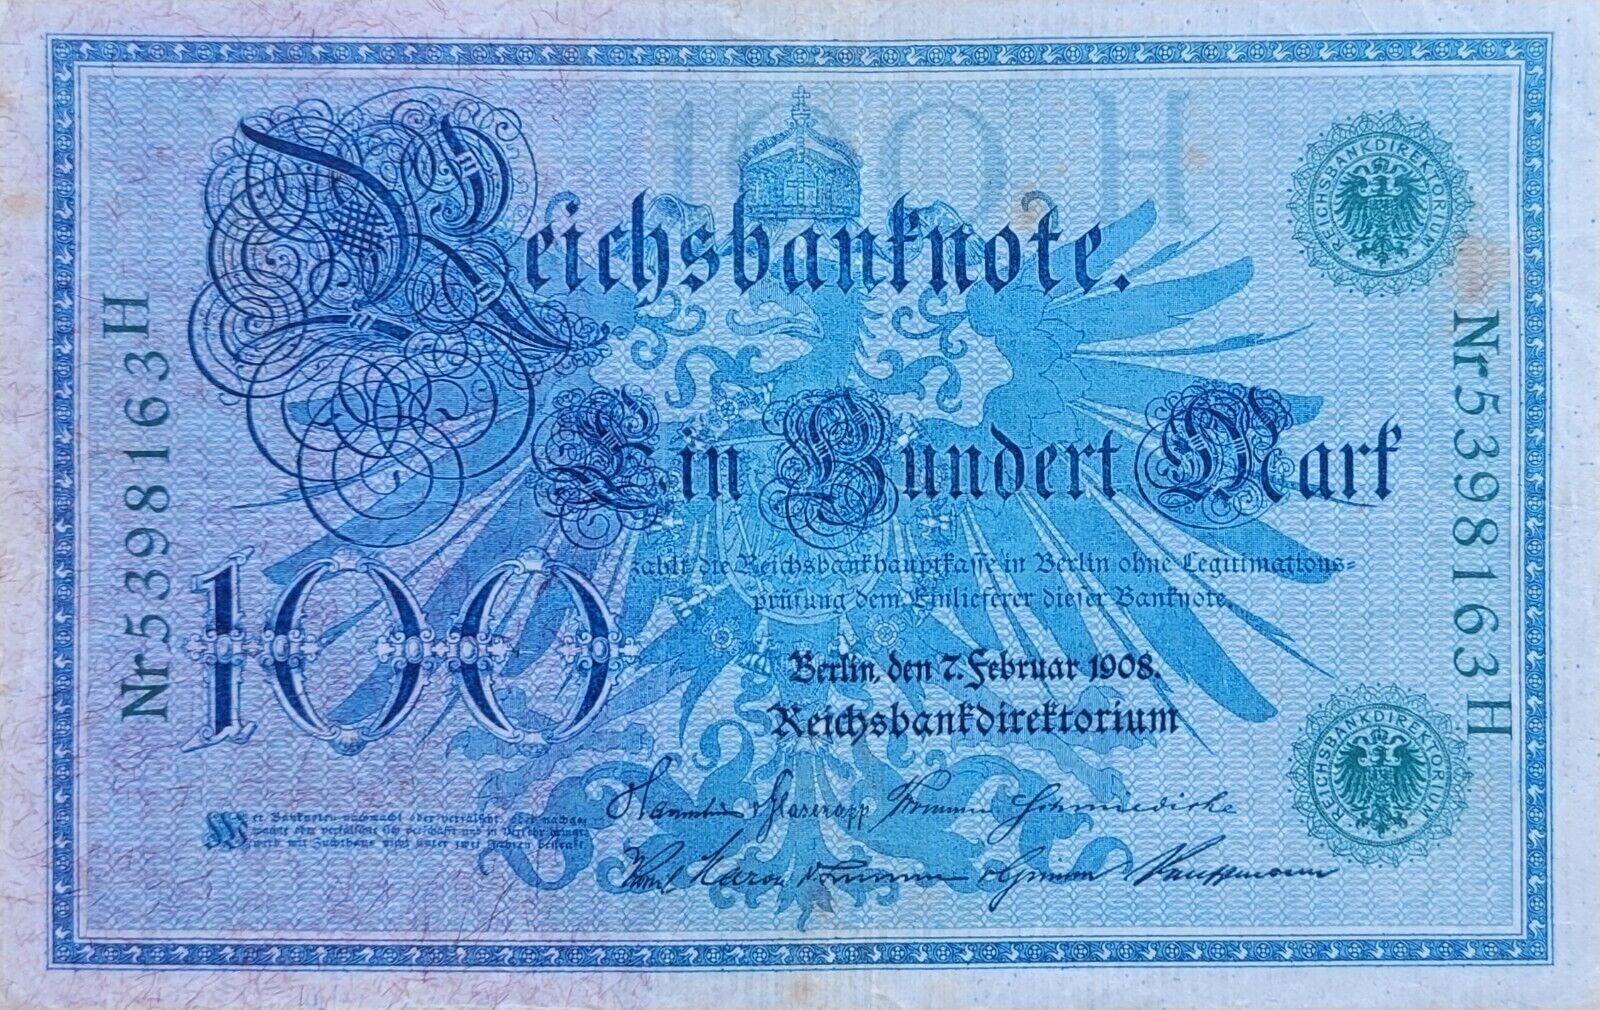 GERMANY 100 MARK REICHSBANKNOTE 1908 GREEN VERY RARE NO RESERVE - $18.46